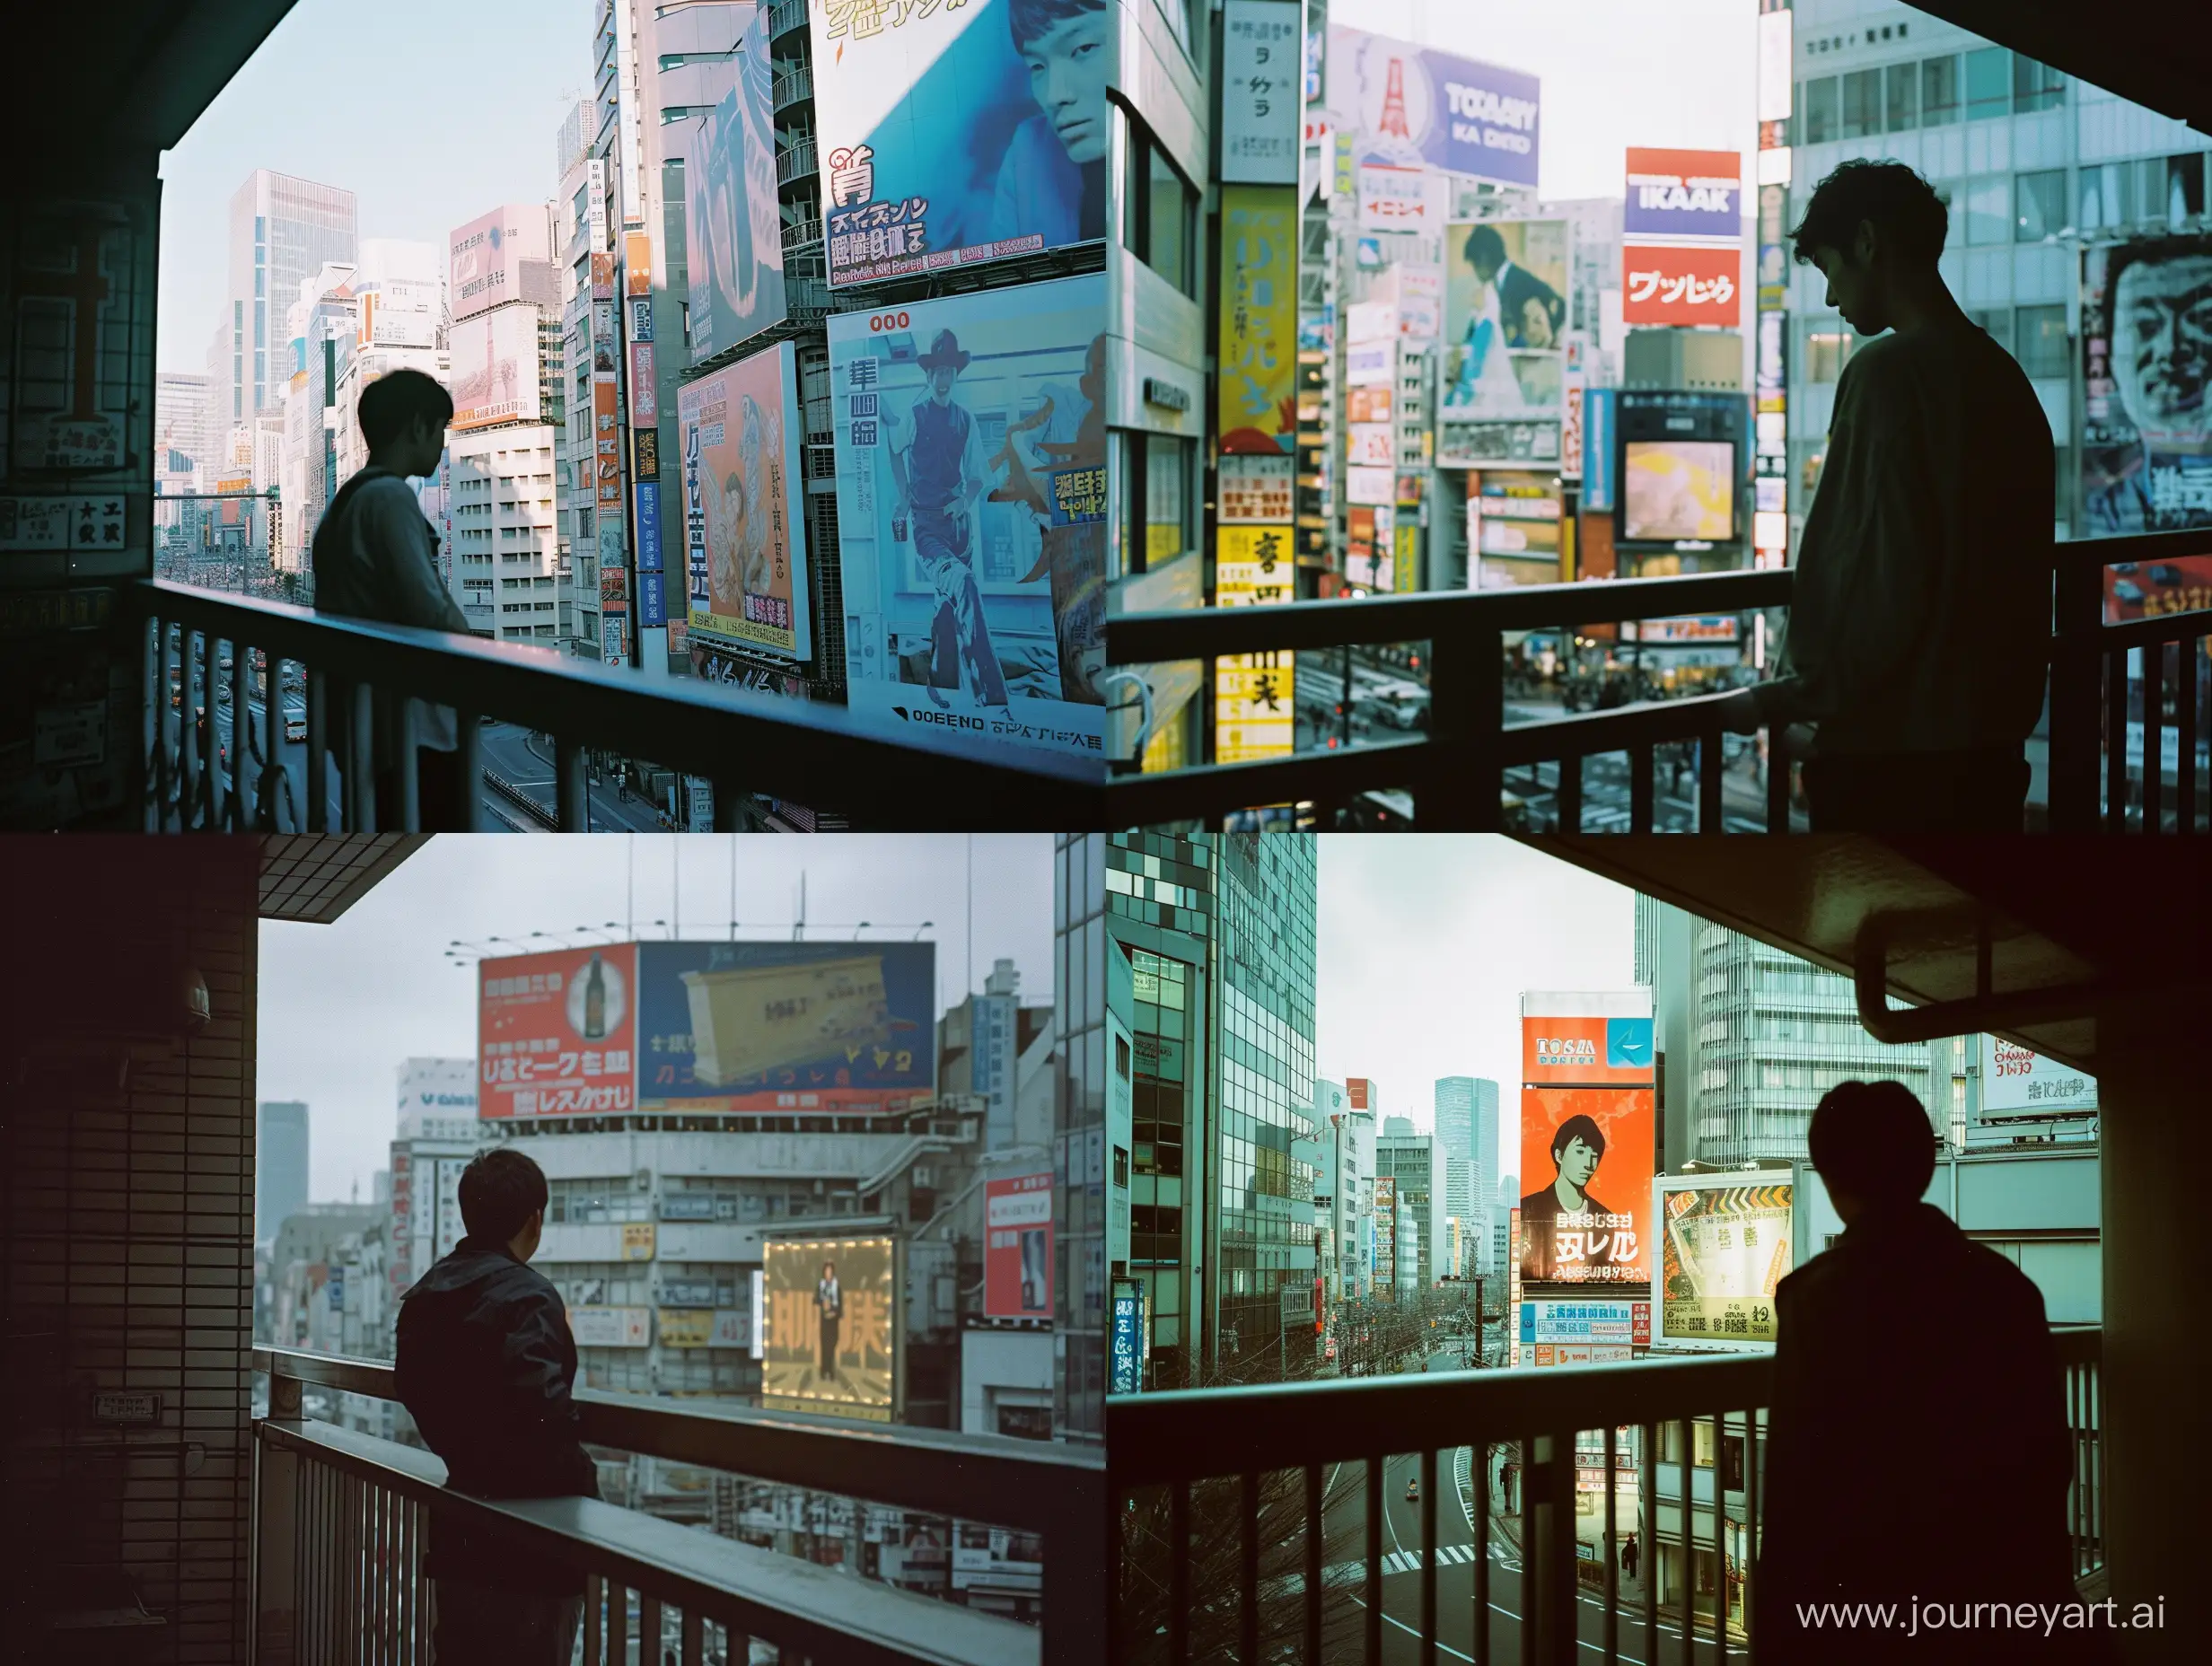 A photo of the tokyo City skyline taken with Kodak Gold 200 film, capturing the natural lighting and busy city environment. The style is raw and the view is from a third person perspective, with billboards in the background, a man is seen standing in on the balcony